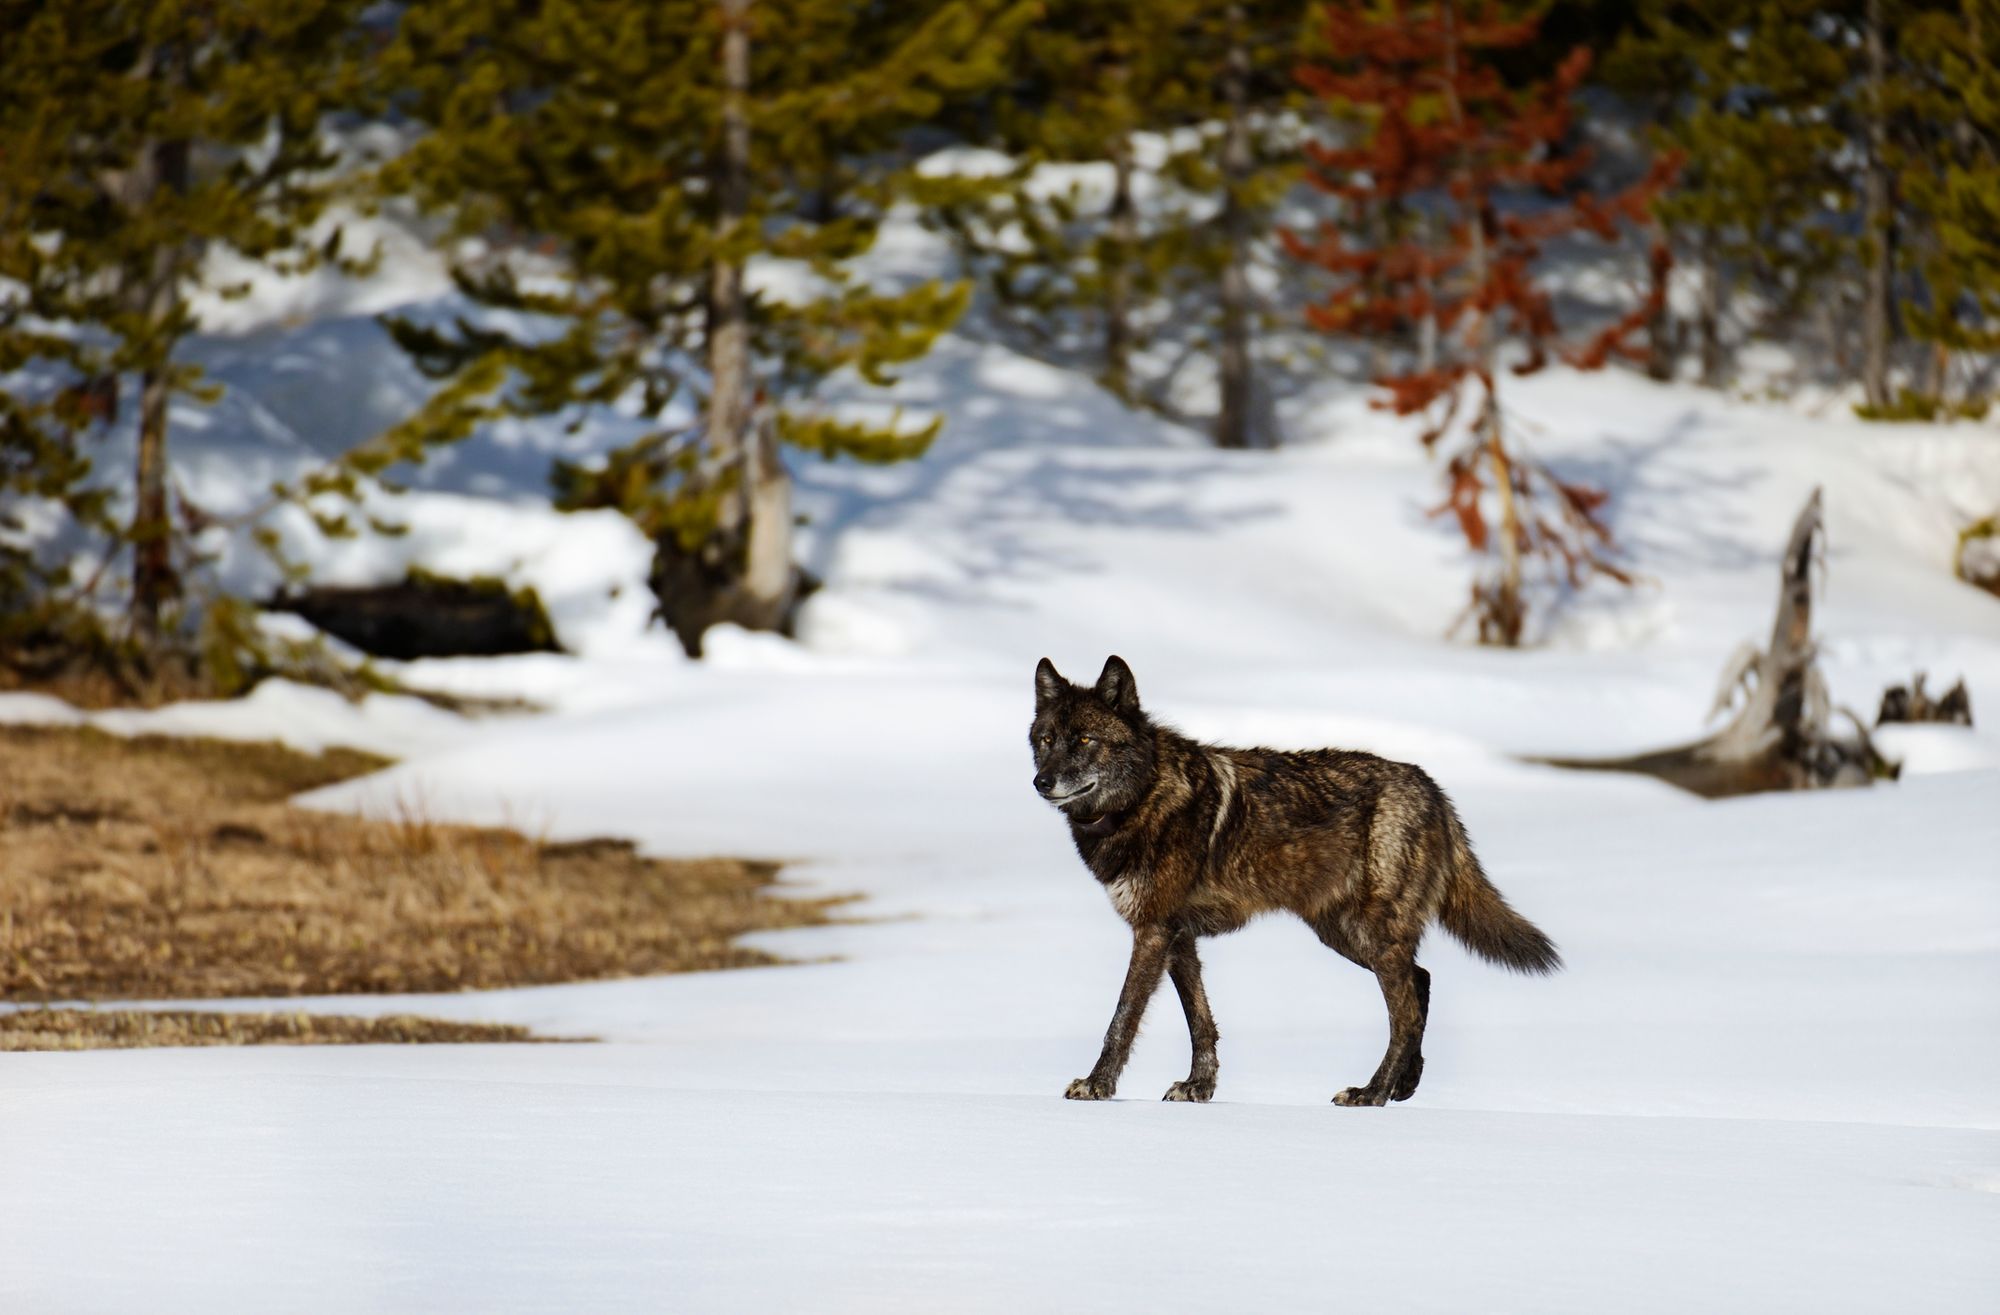 A lone wolf in the snowy landscapes of Yellowstone Park.